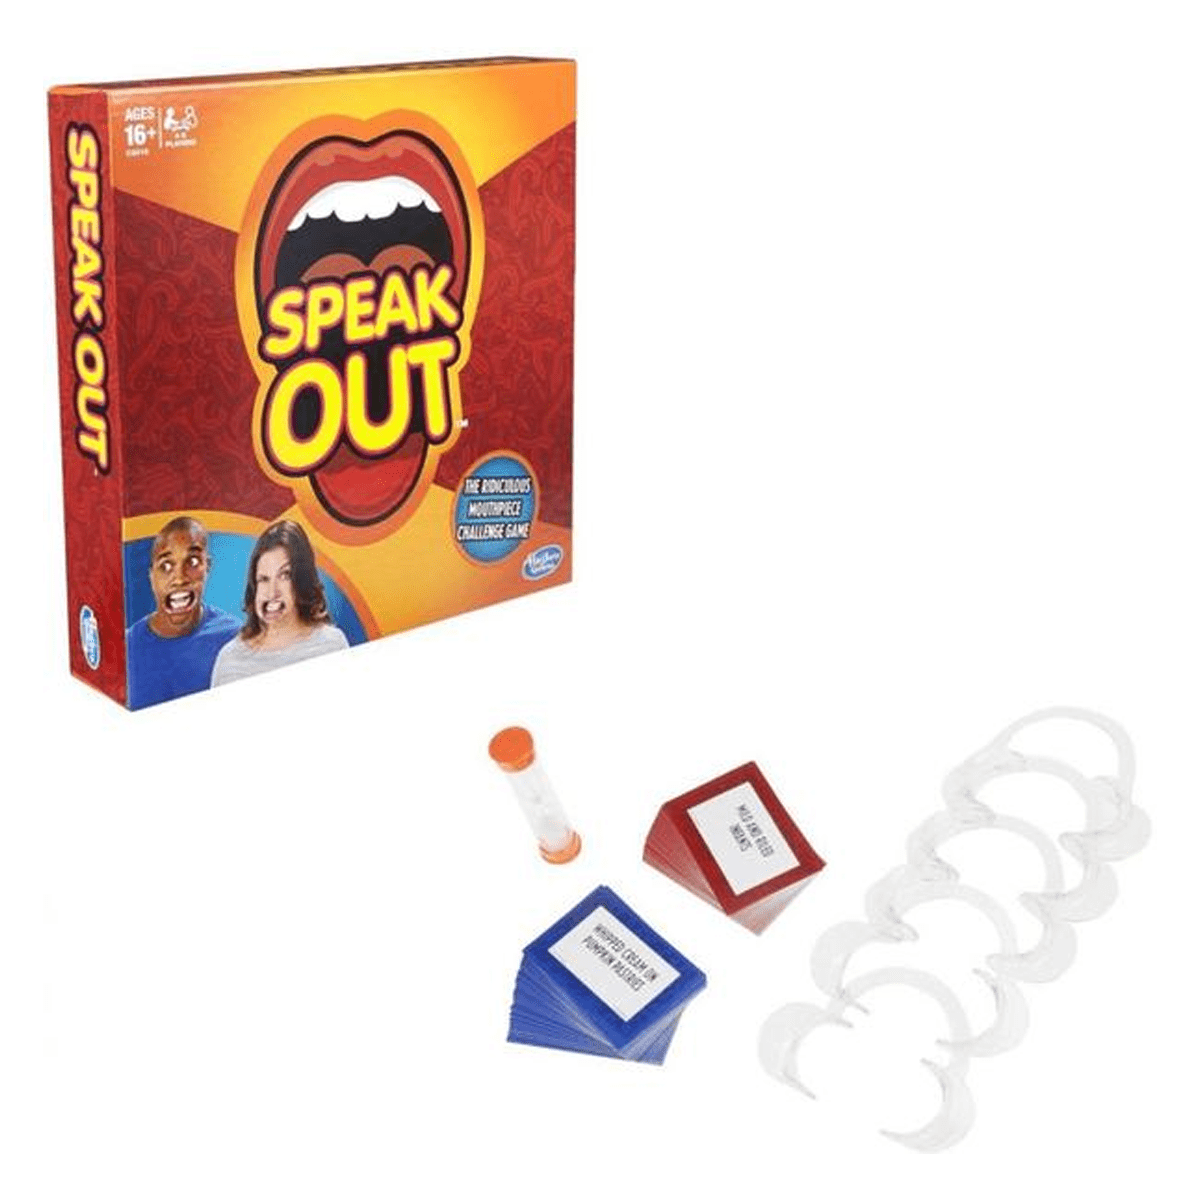 Speak Out Game